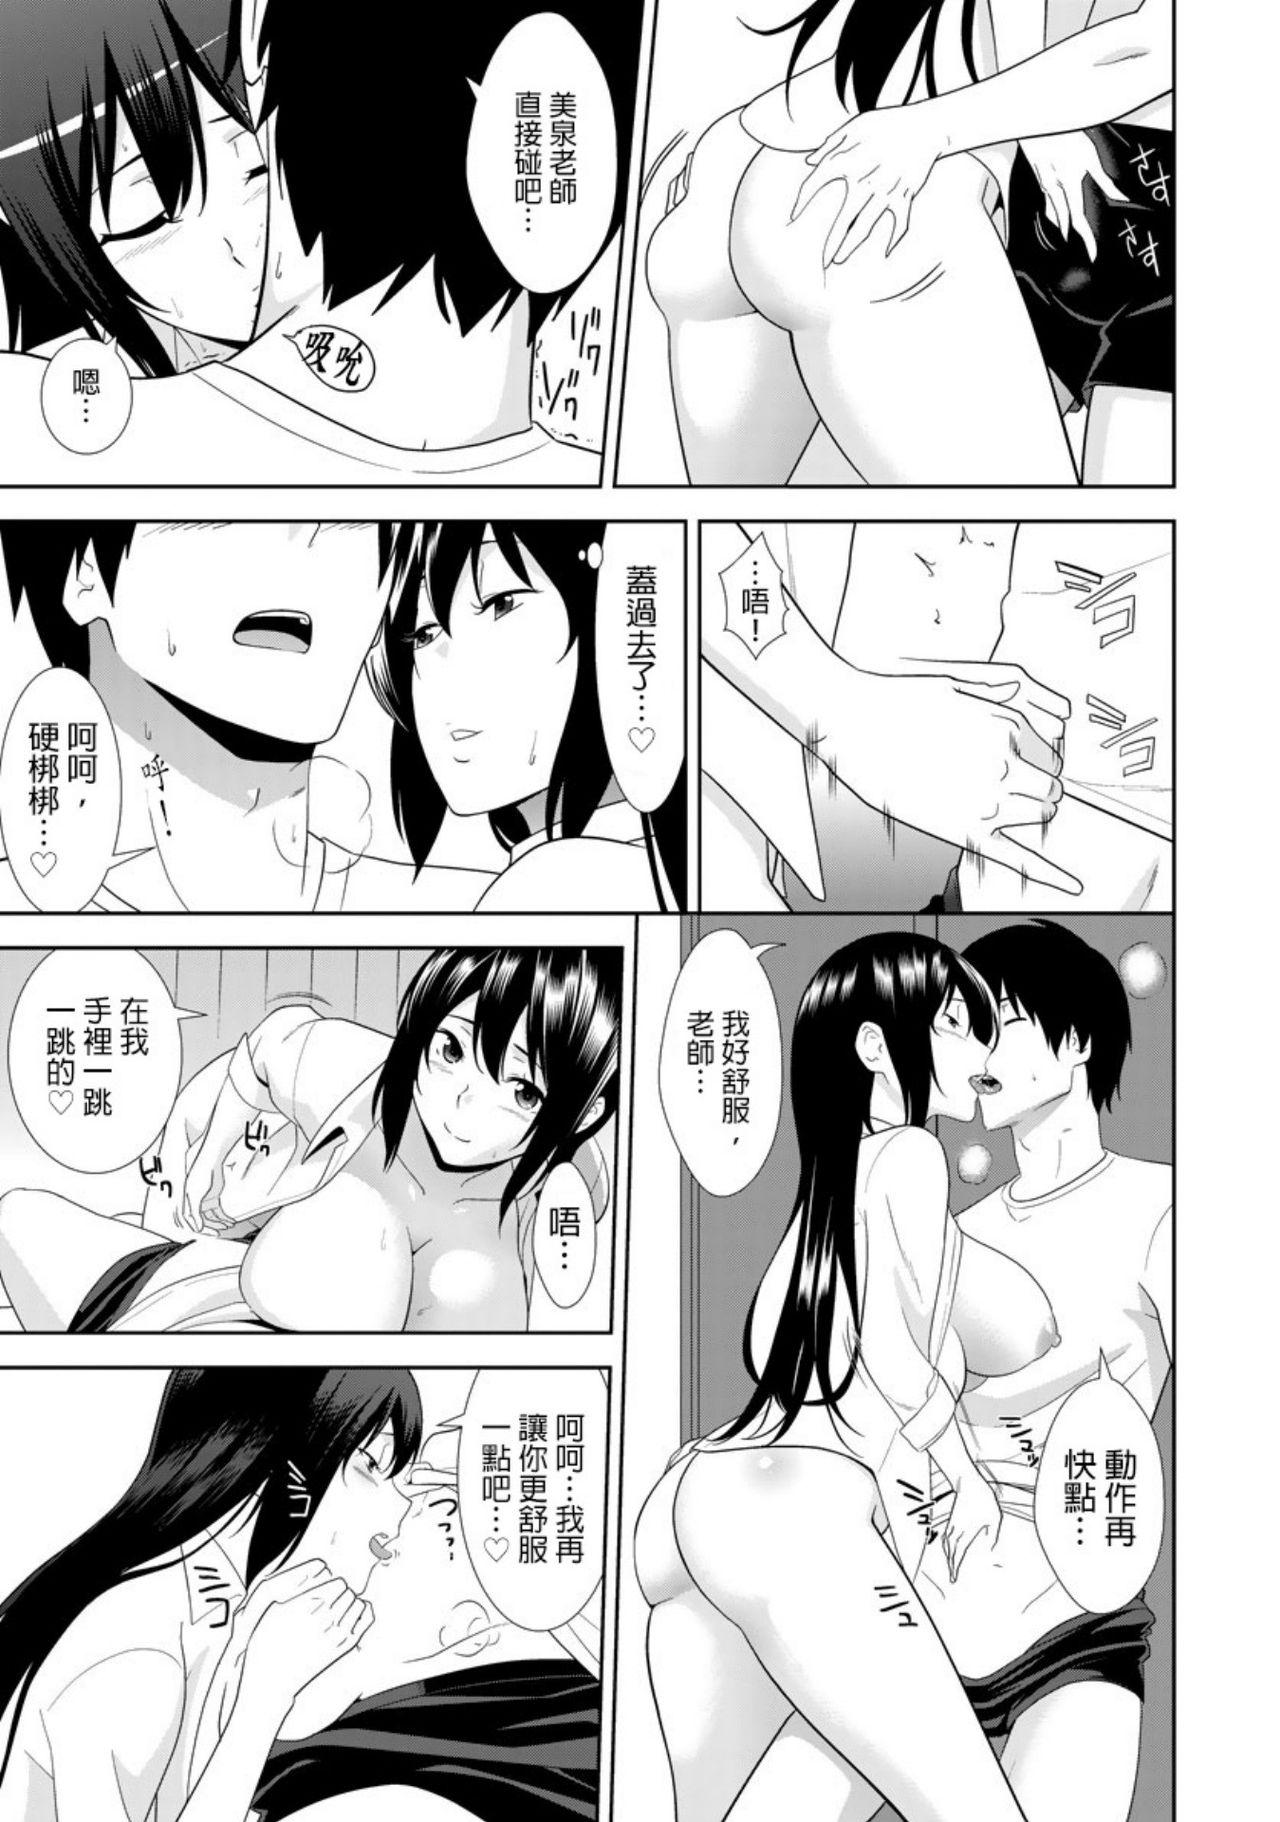 Lez Fuck 教え子に襲ワレル人妻は抵抗できなくて Ch.7 8teen - Page 4